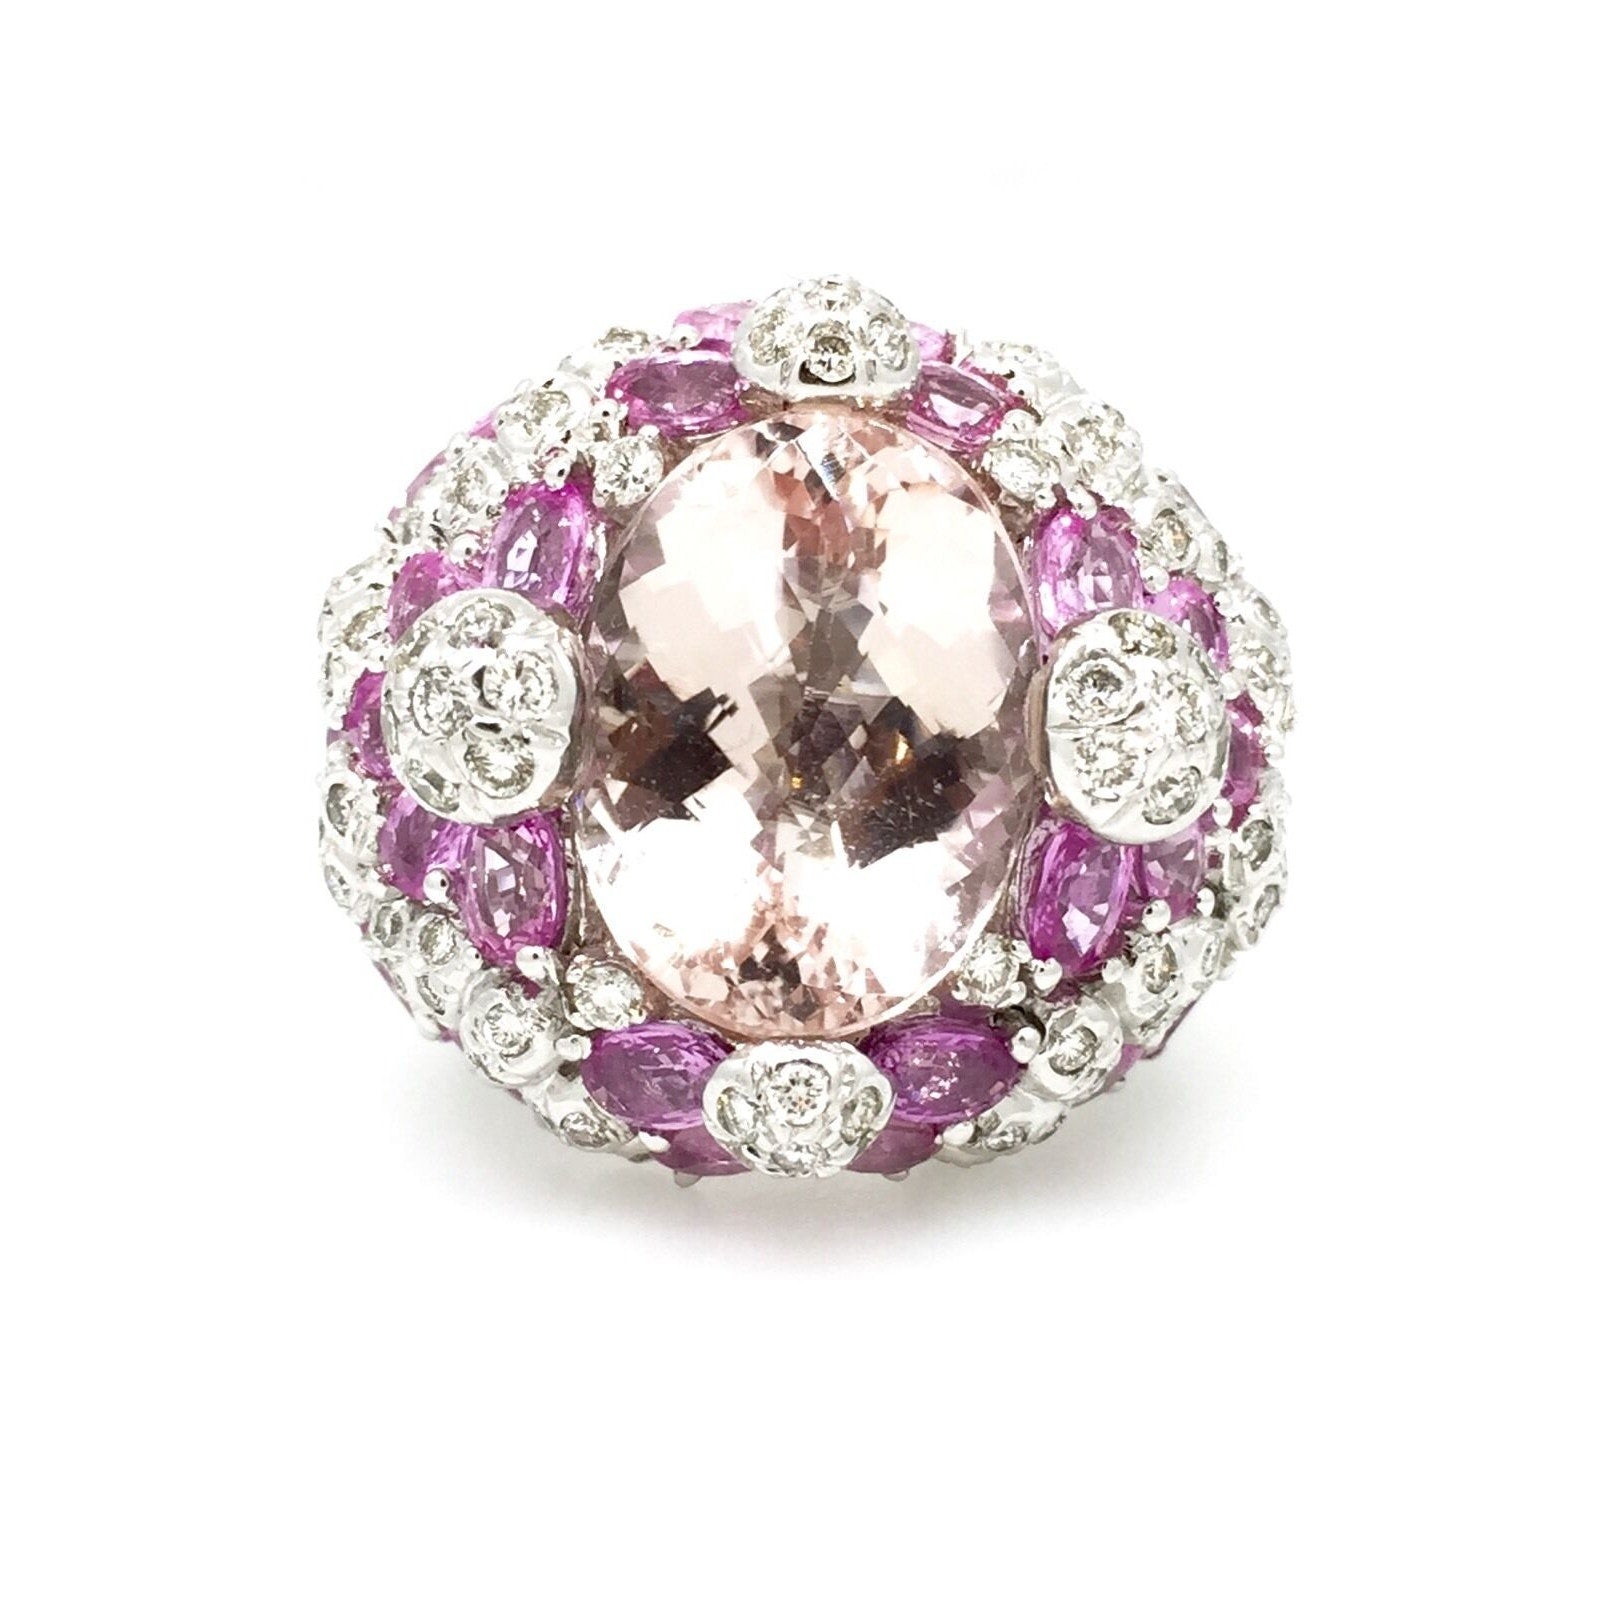 15.15 carat Kunzite, Pink Sapphire and Diamond Cocktail Ring in 18k White Gold